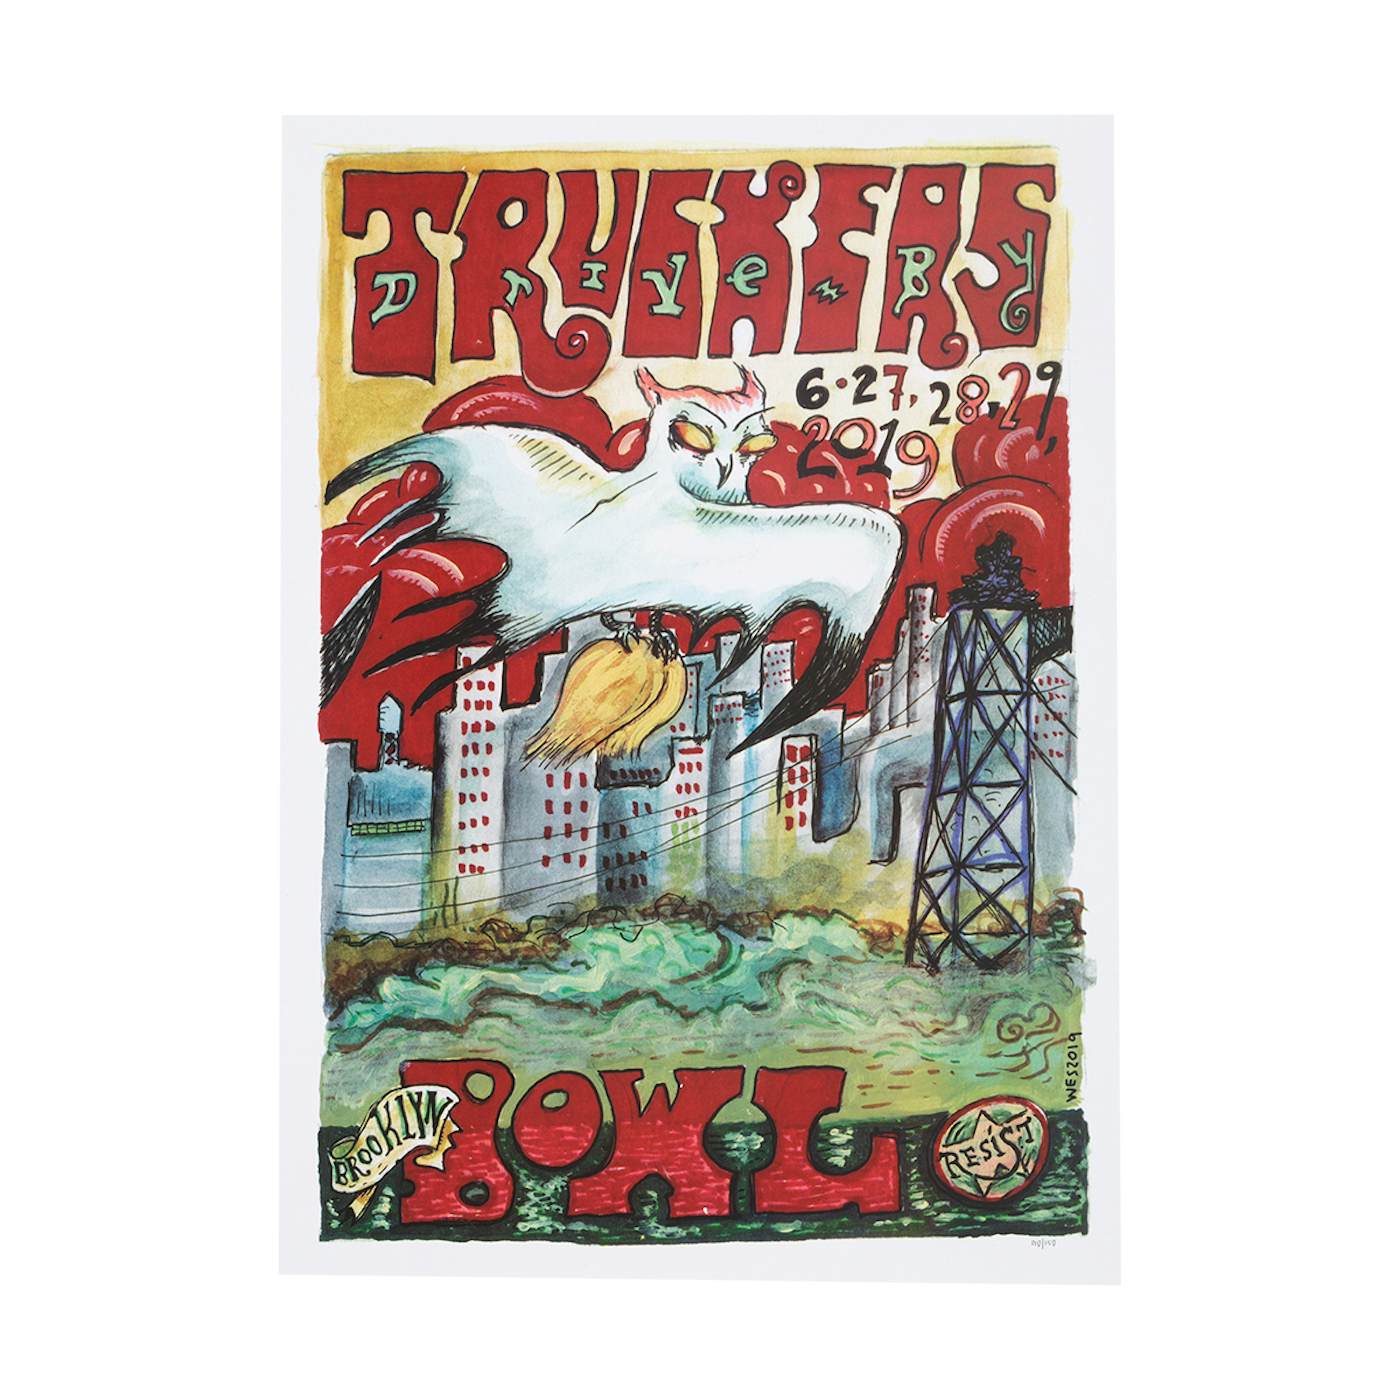 Drive-By Truckers Brooklyn Bowl June 27-29 2019 Poster